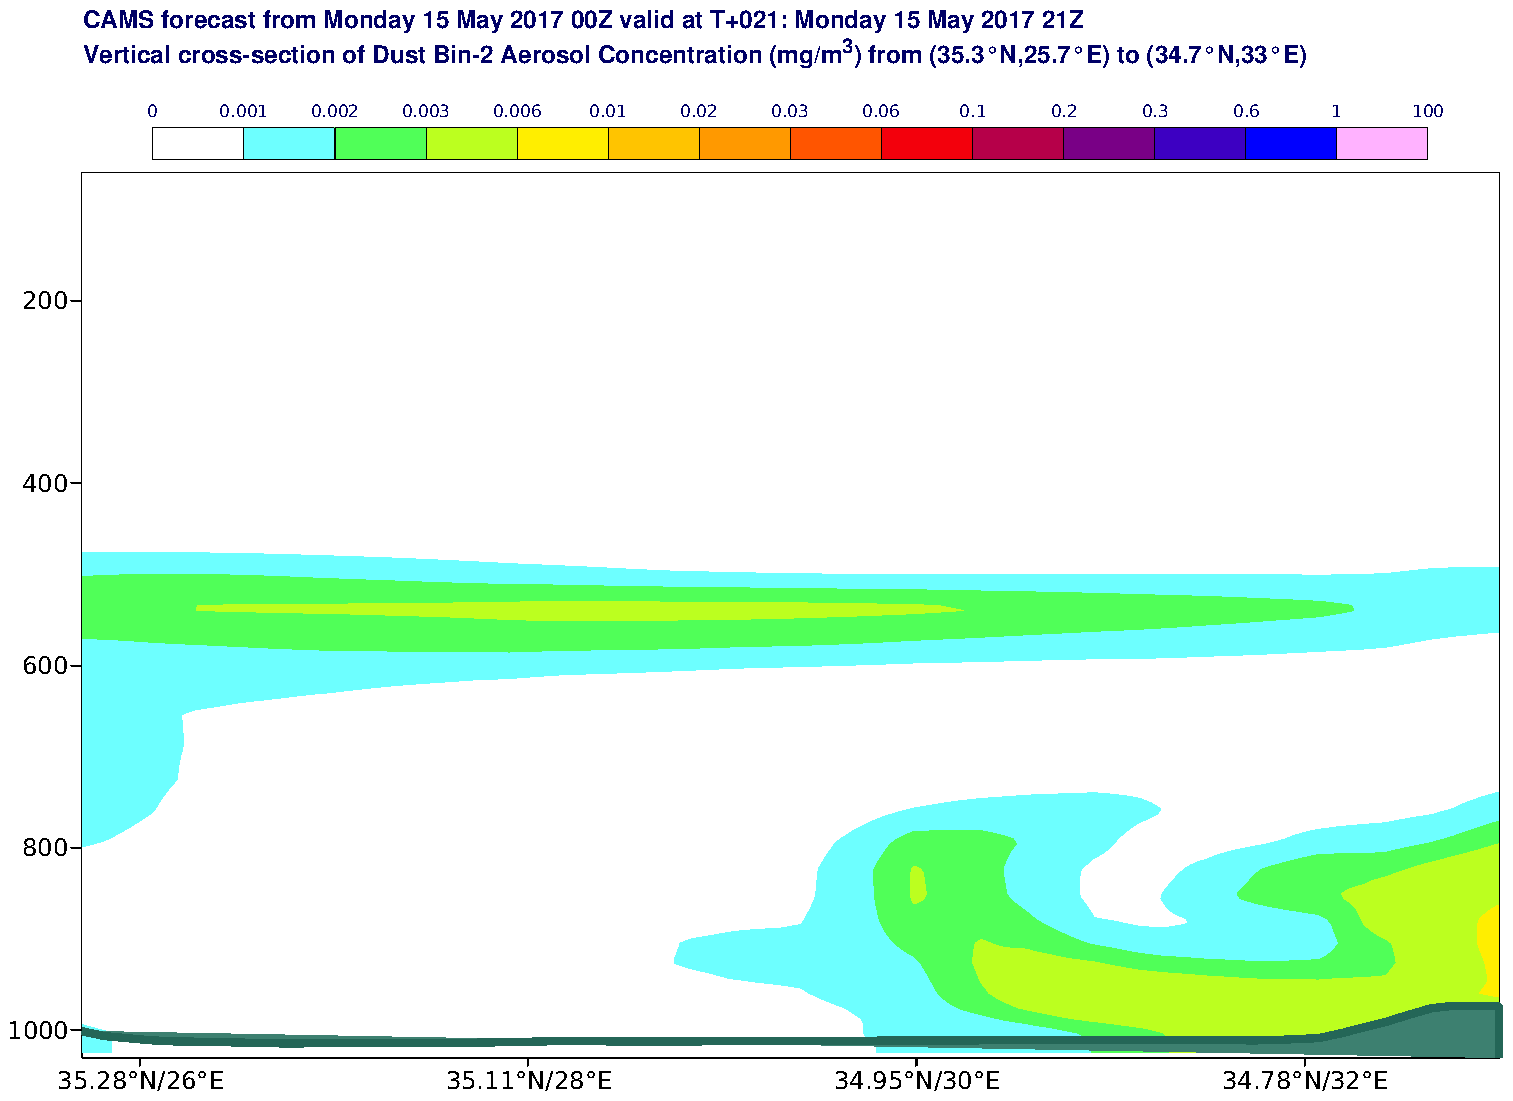 Vertical cross-section of Dust Bin-2 Aerosol Concentration (mg/m3) valid at T21 - 2017-05-15 21:00